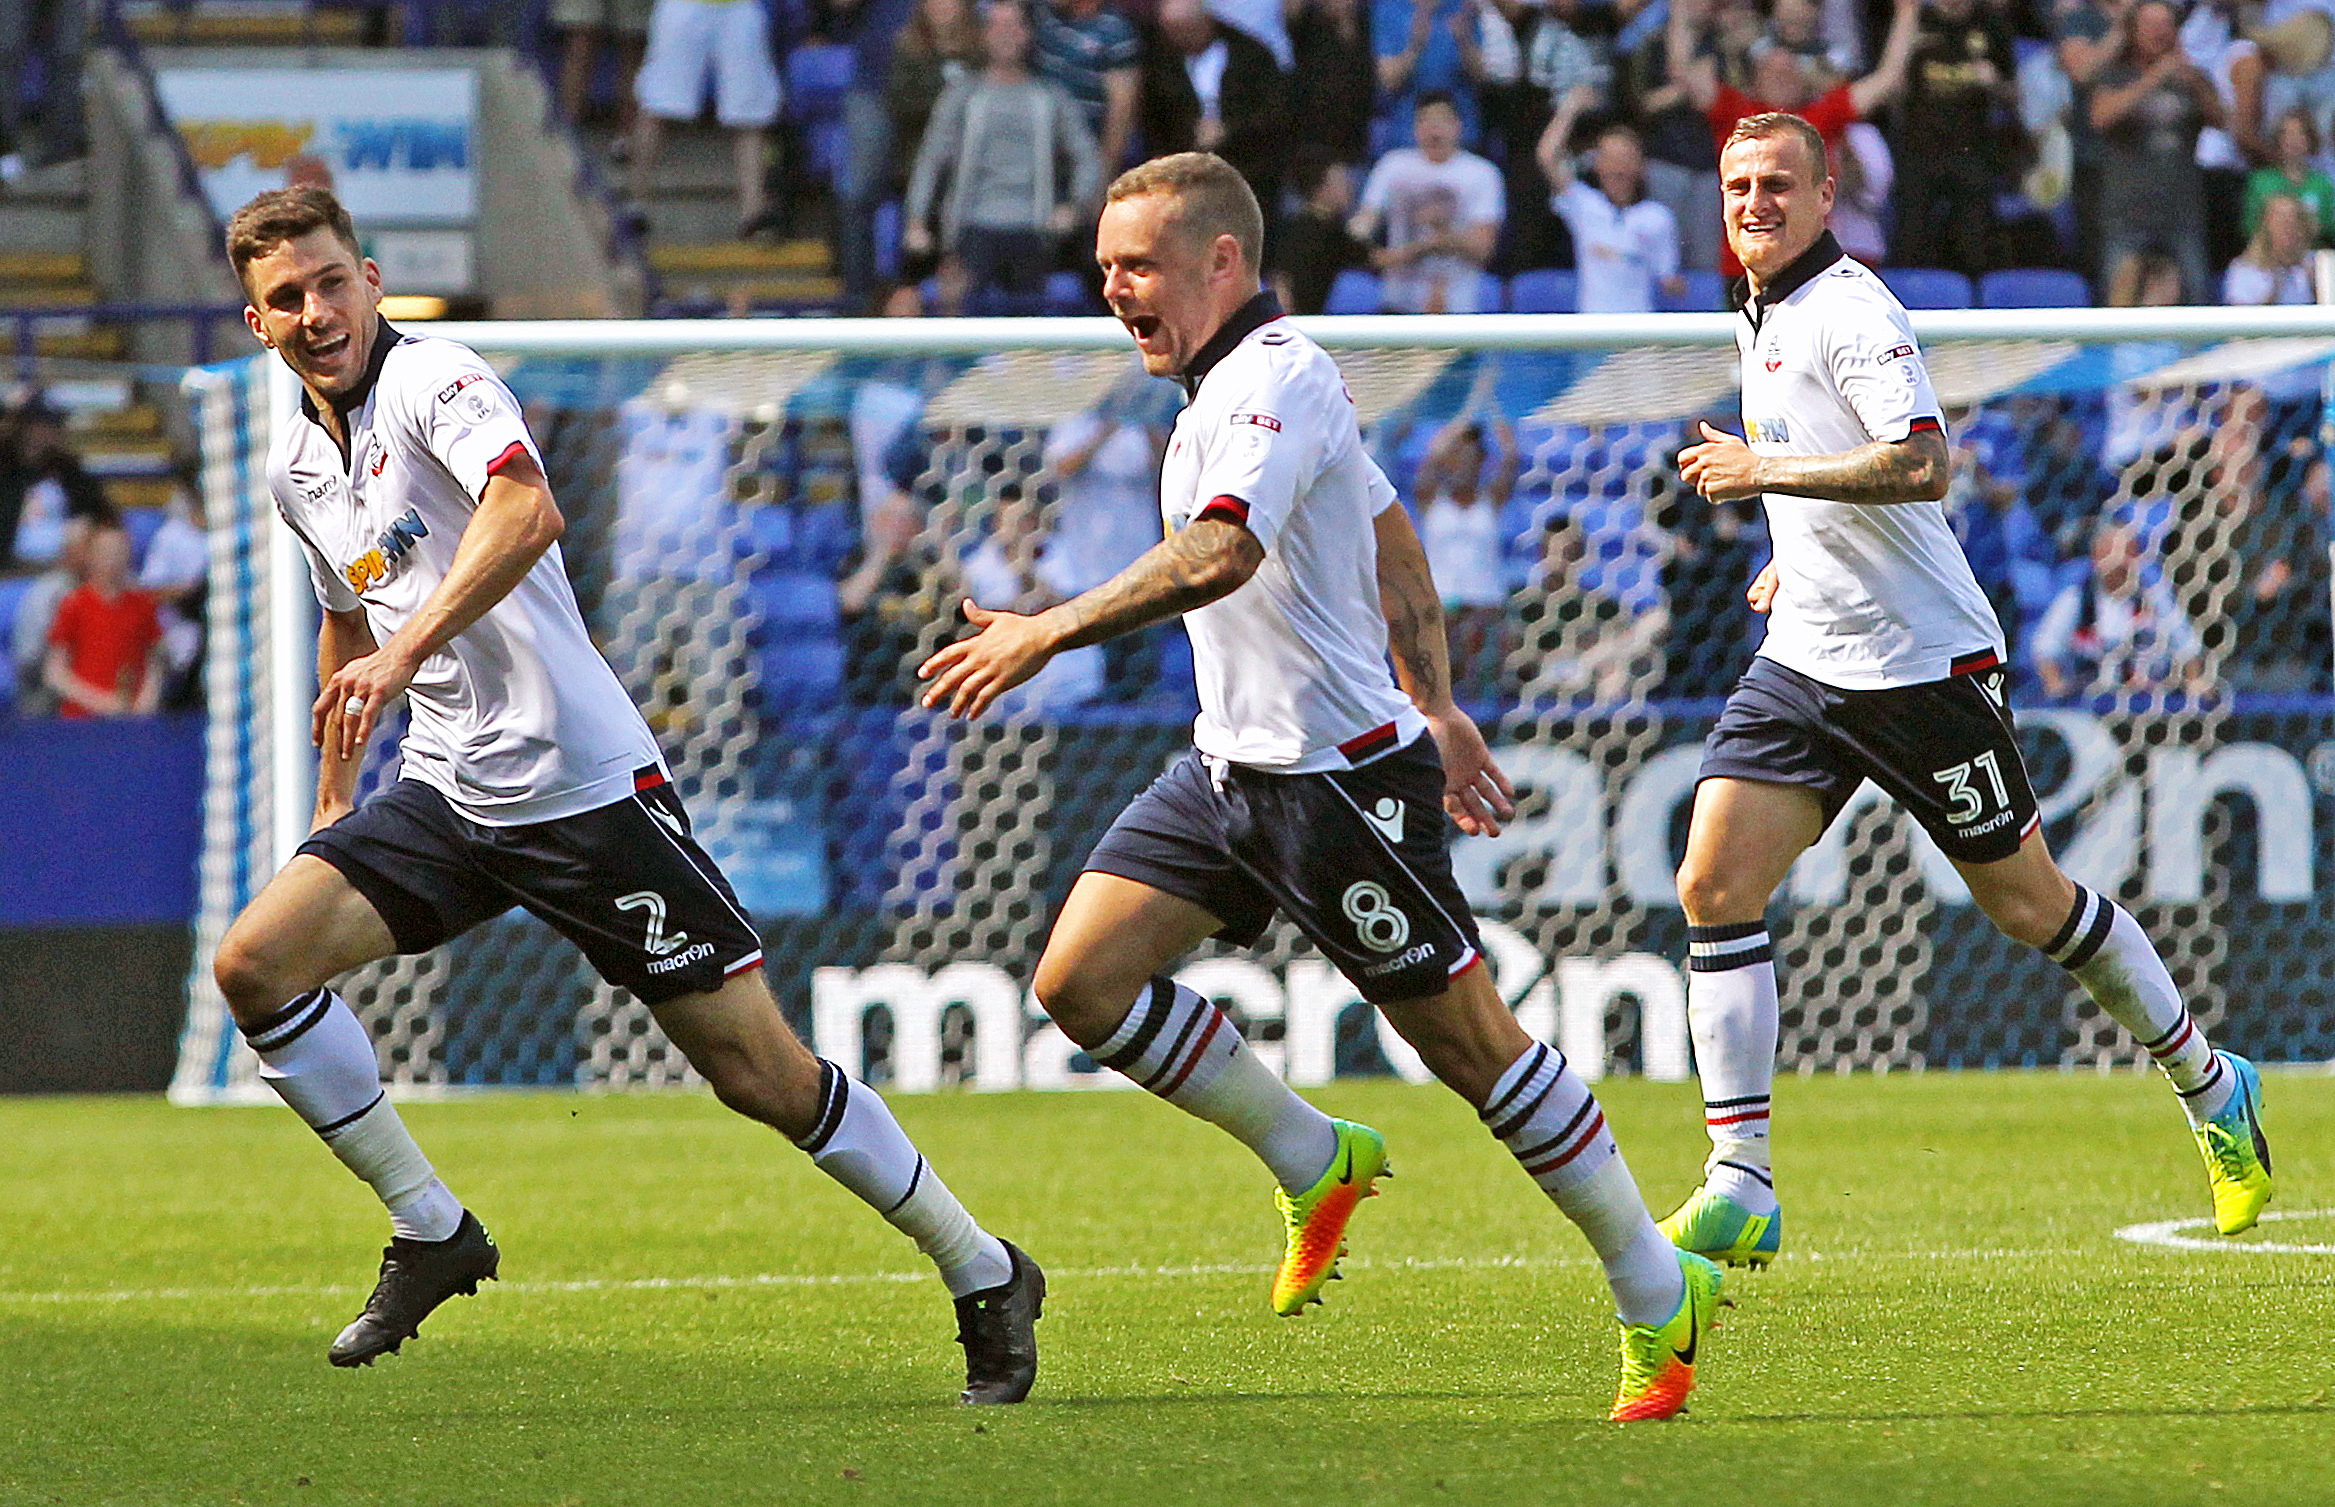 Jay Spearing’s goal handed the Whites a 1-0 opening day win against Sheffield United in 2016-17 